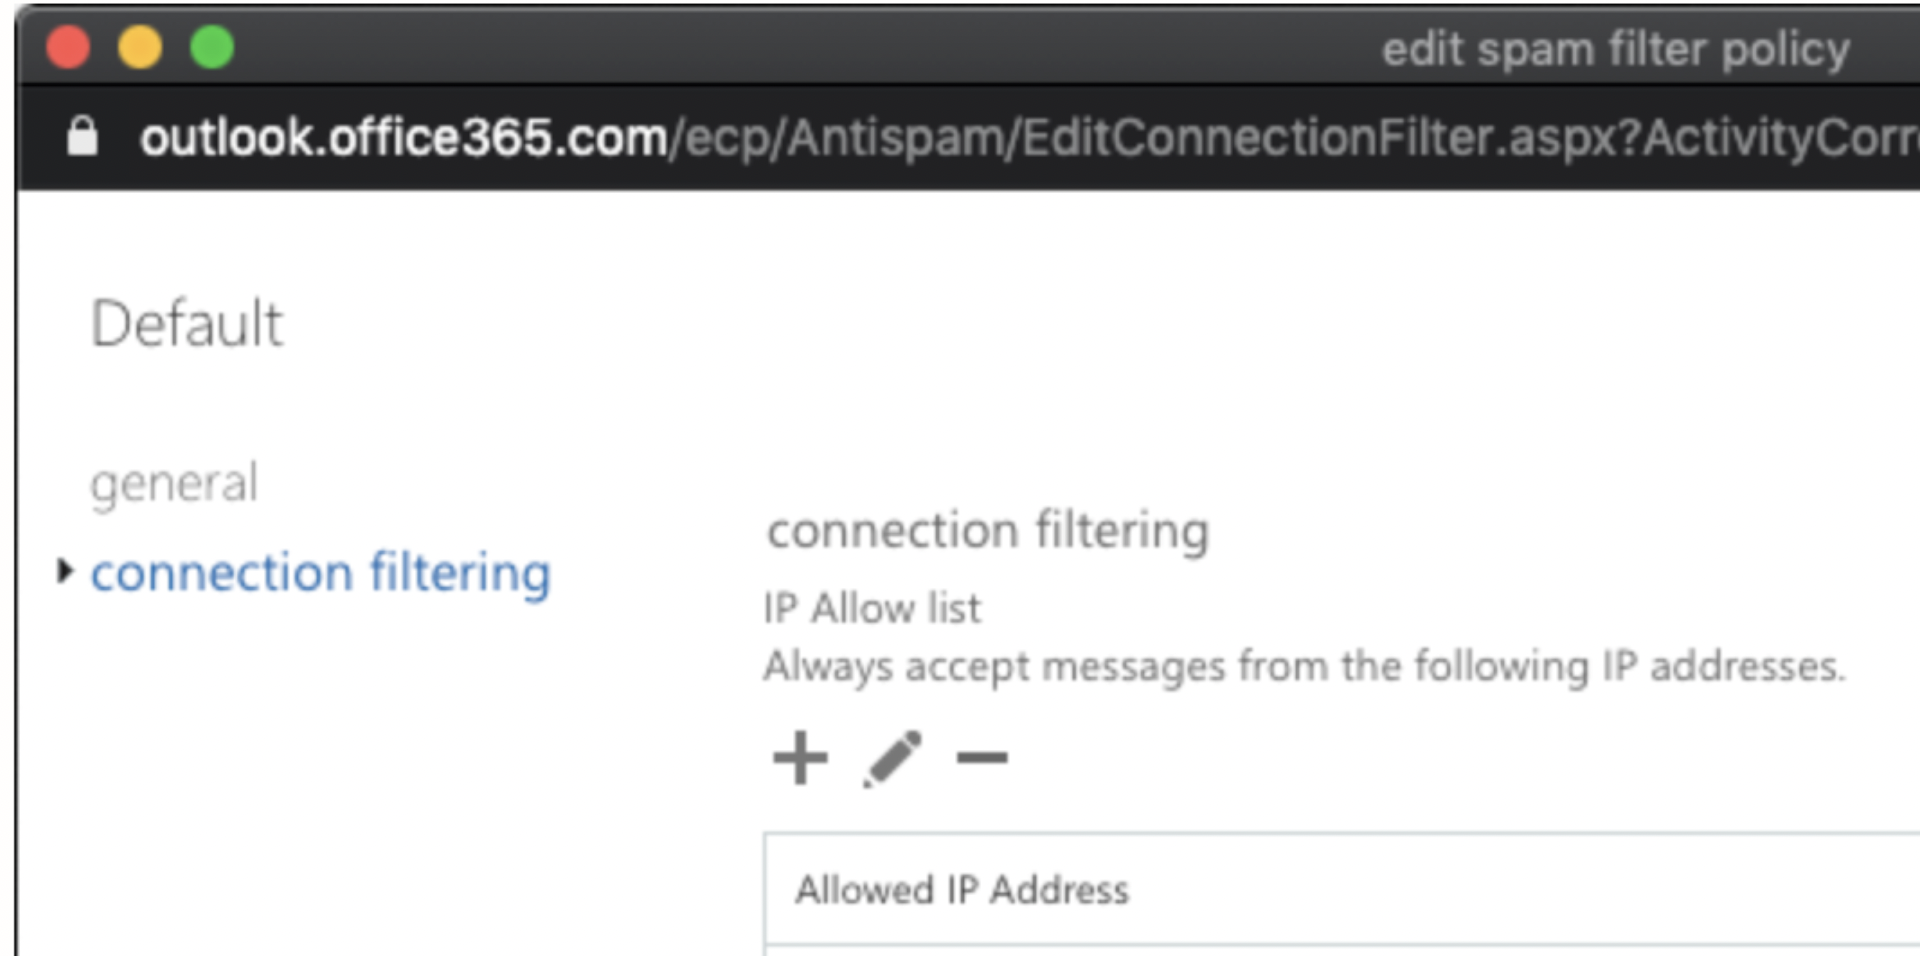 connection filtering for Outlook in Office 365.